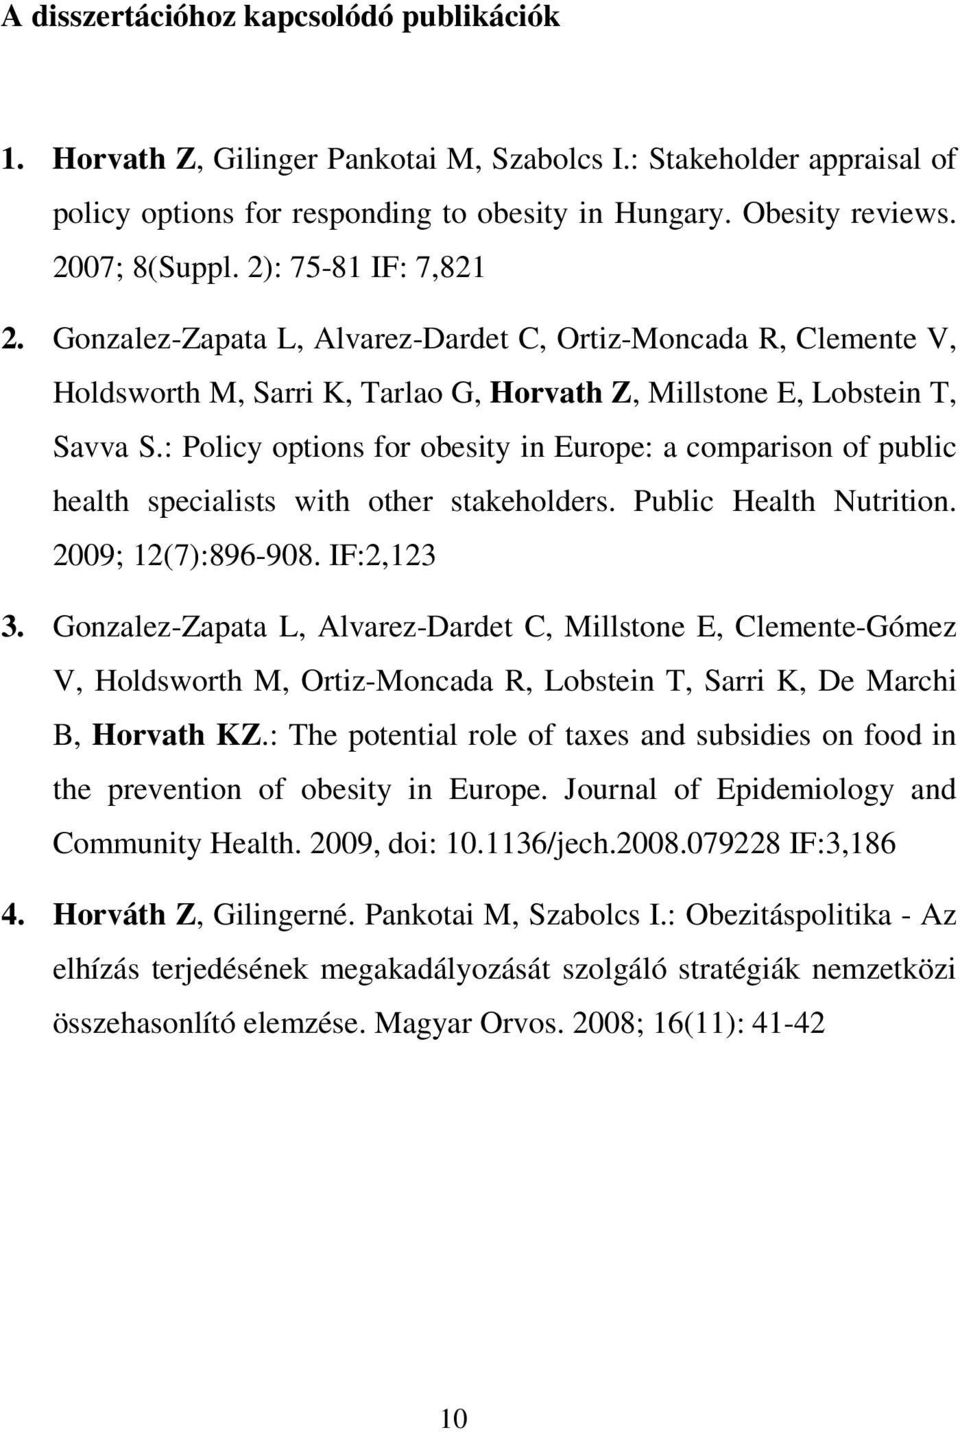 : Policy options for obesity in Europe: a comparison of public health specialists with other stakeholders. Public Health Nutrition. 2009; 12(7):896-908. IF:2,123 3.